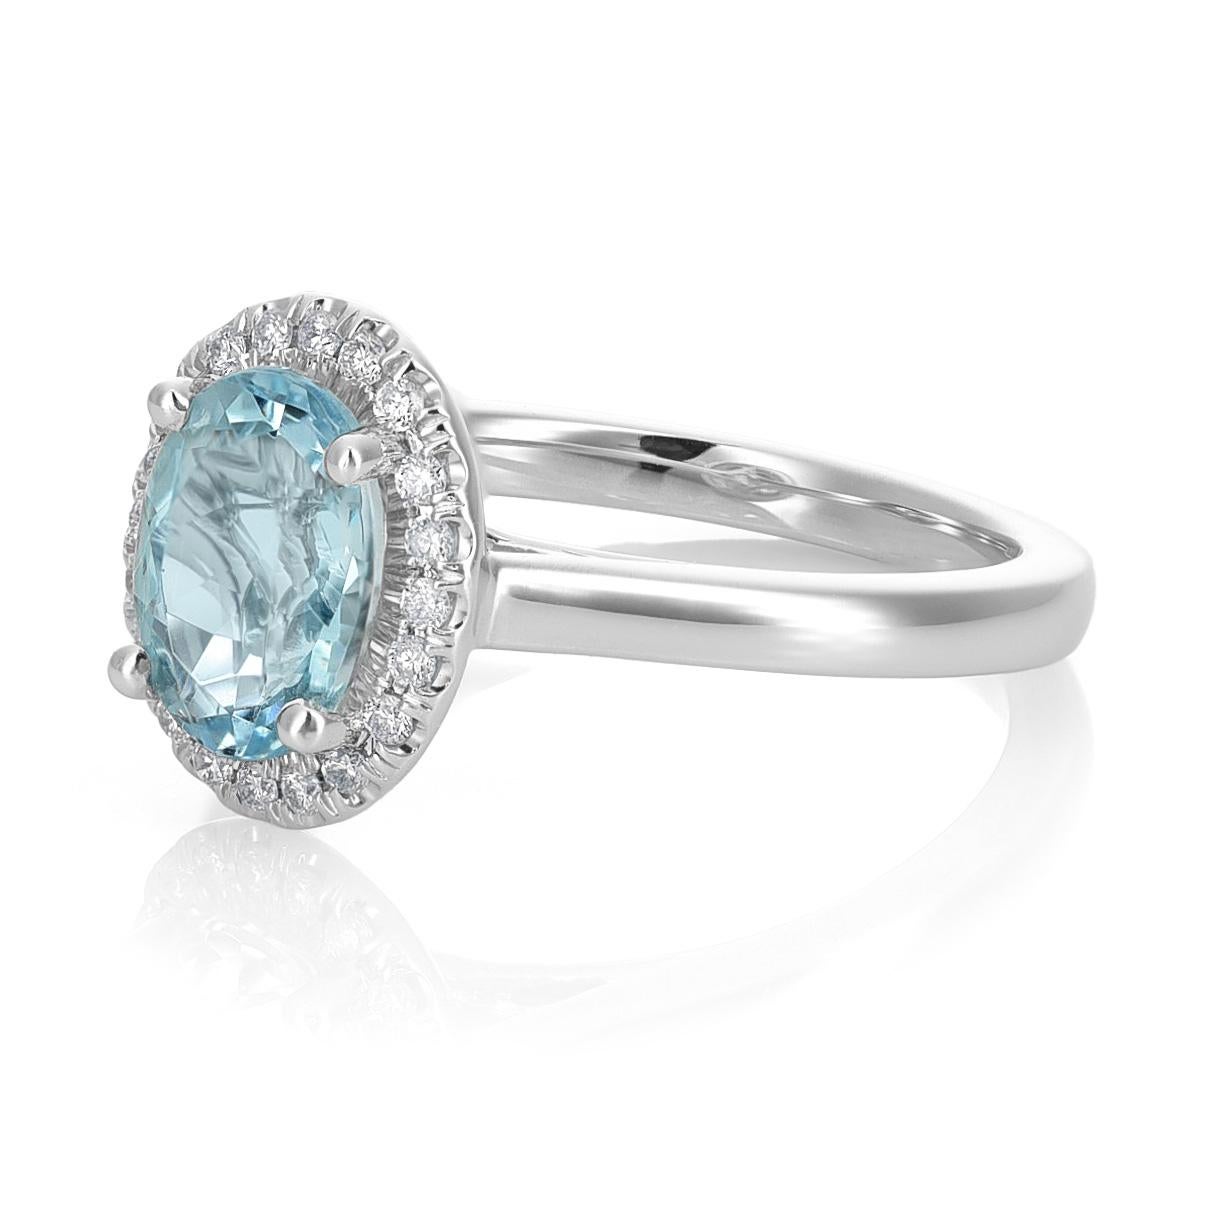 Presenting an enchanting 14K White Gold Ring featuring a captivating 1.13 carats oval-shaped Natural Aquamarine. This exquisite gem, delicately heated to enhance its allure, takes center stage, surrounded by 0.10 carats of dazzling Diamonds. The